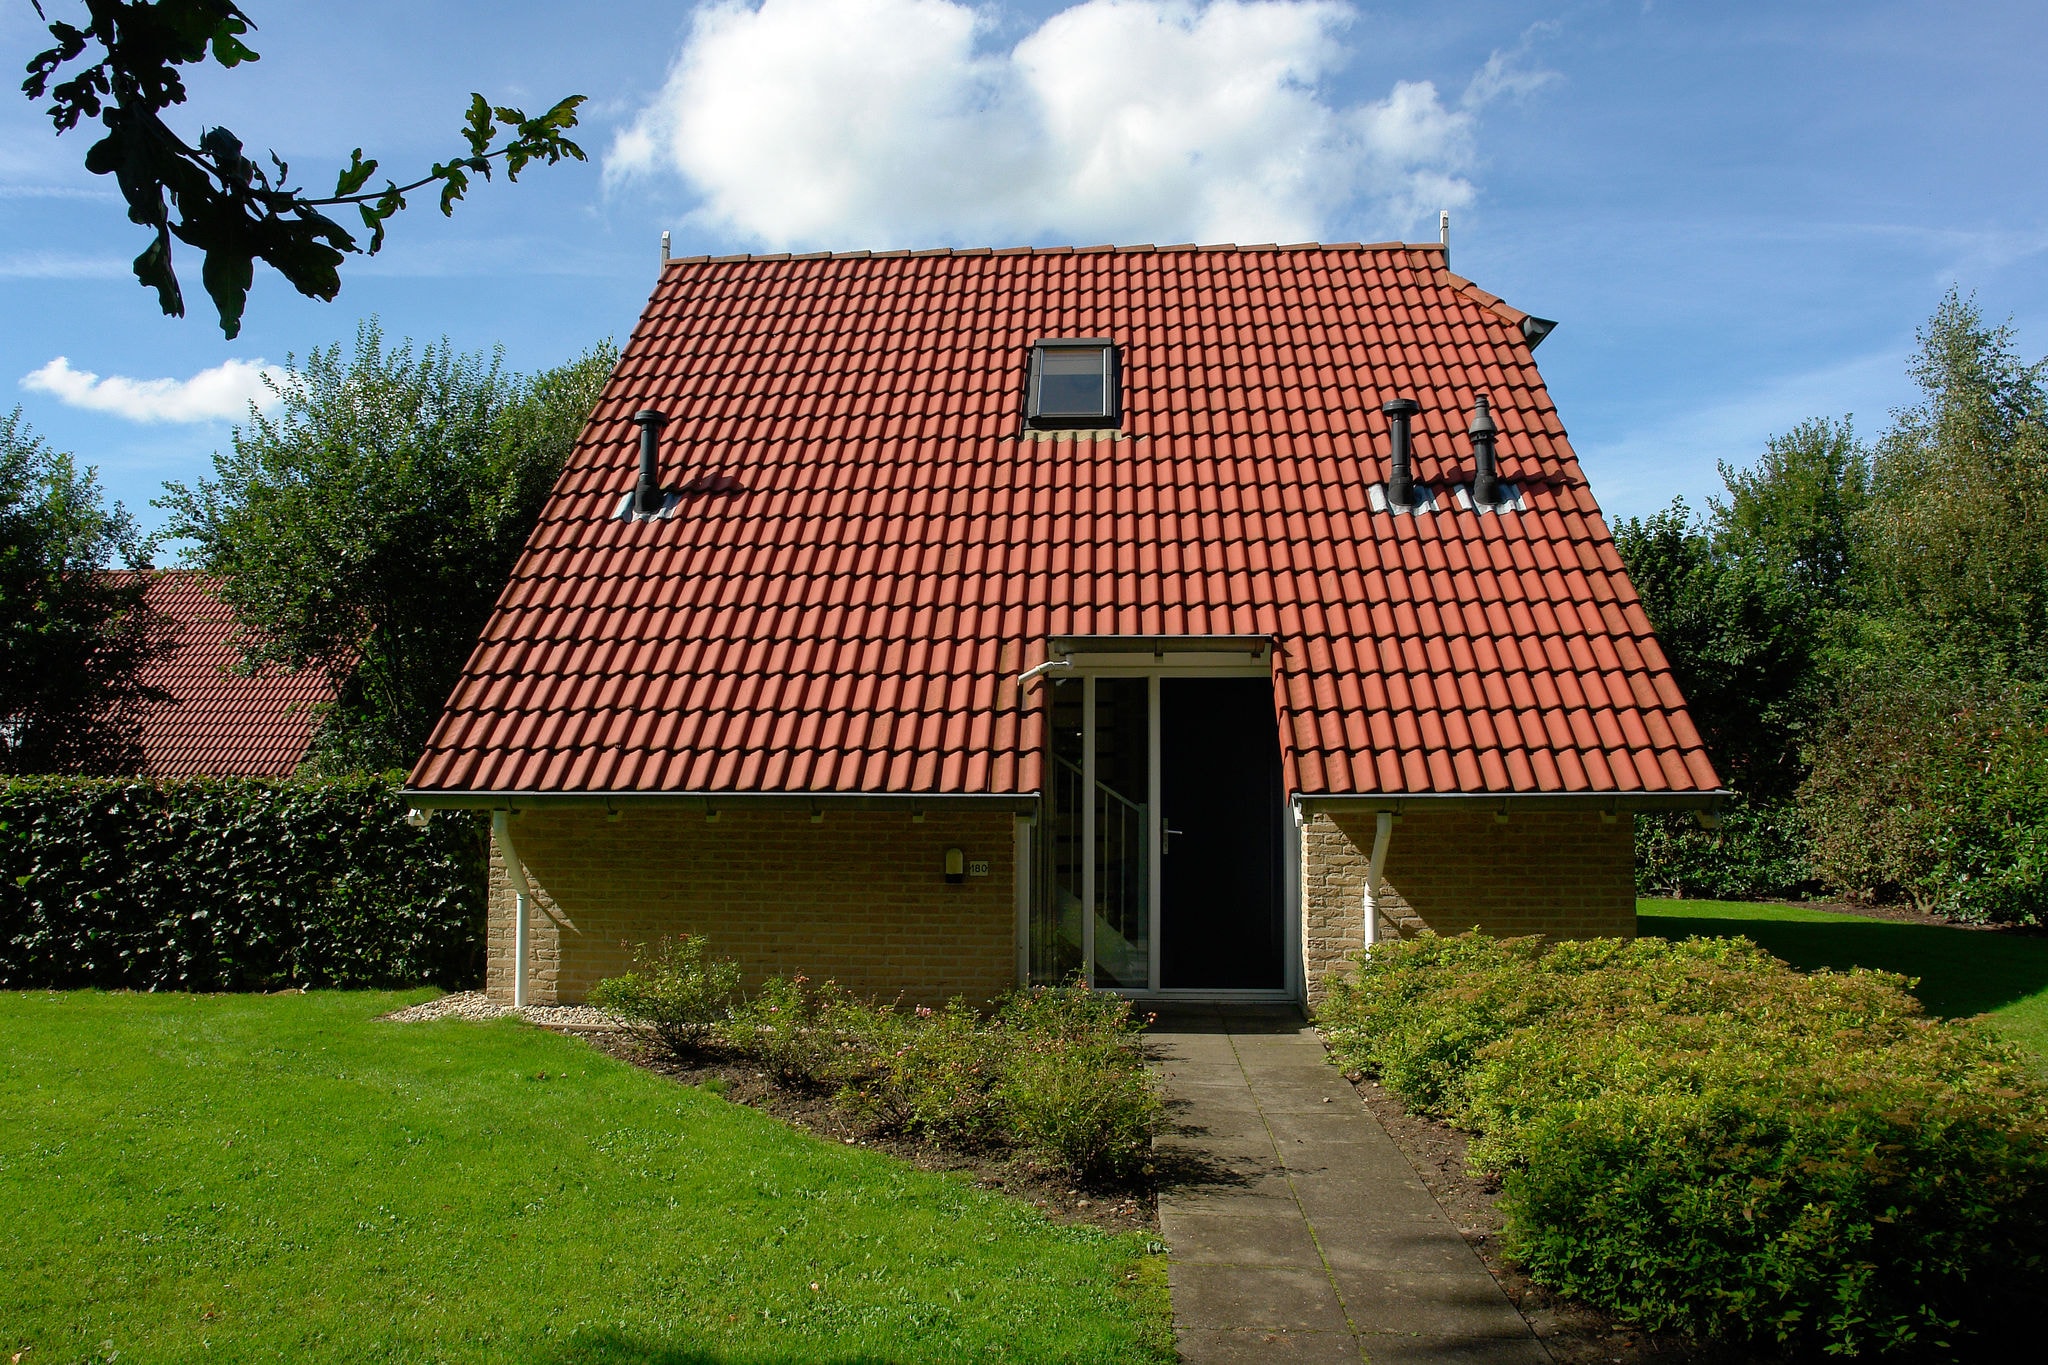 Detached holiday home with WiFi, 20 km from Assen